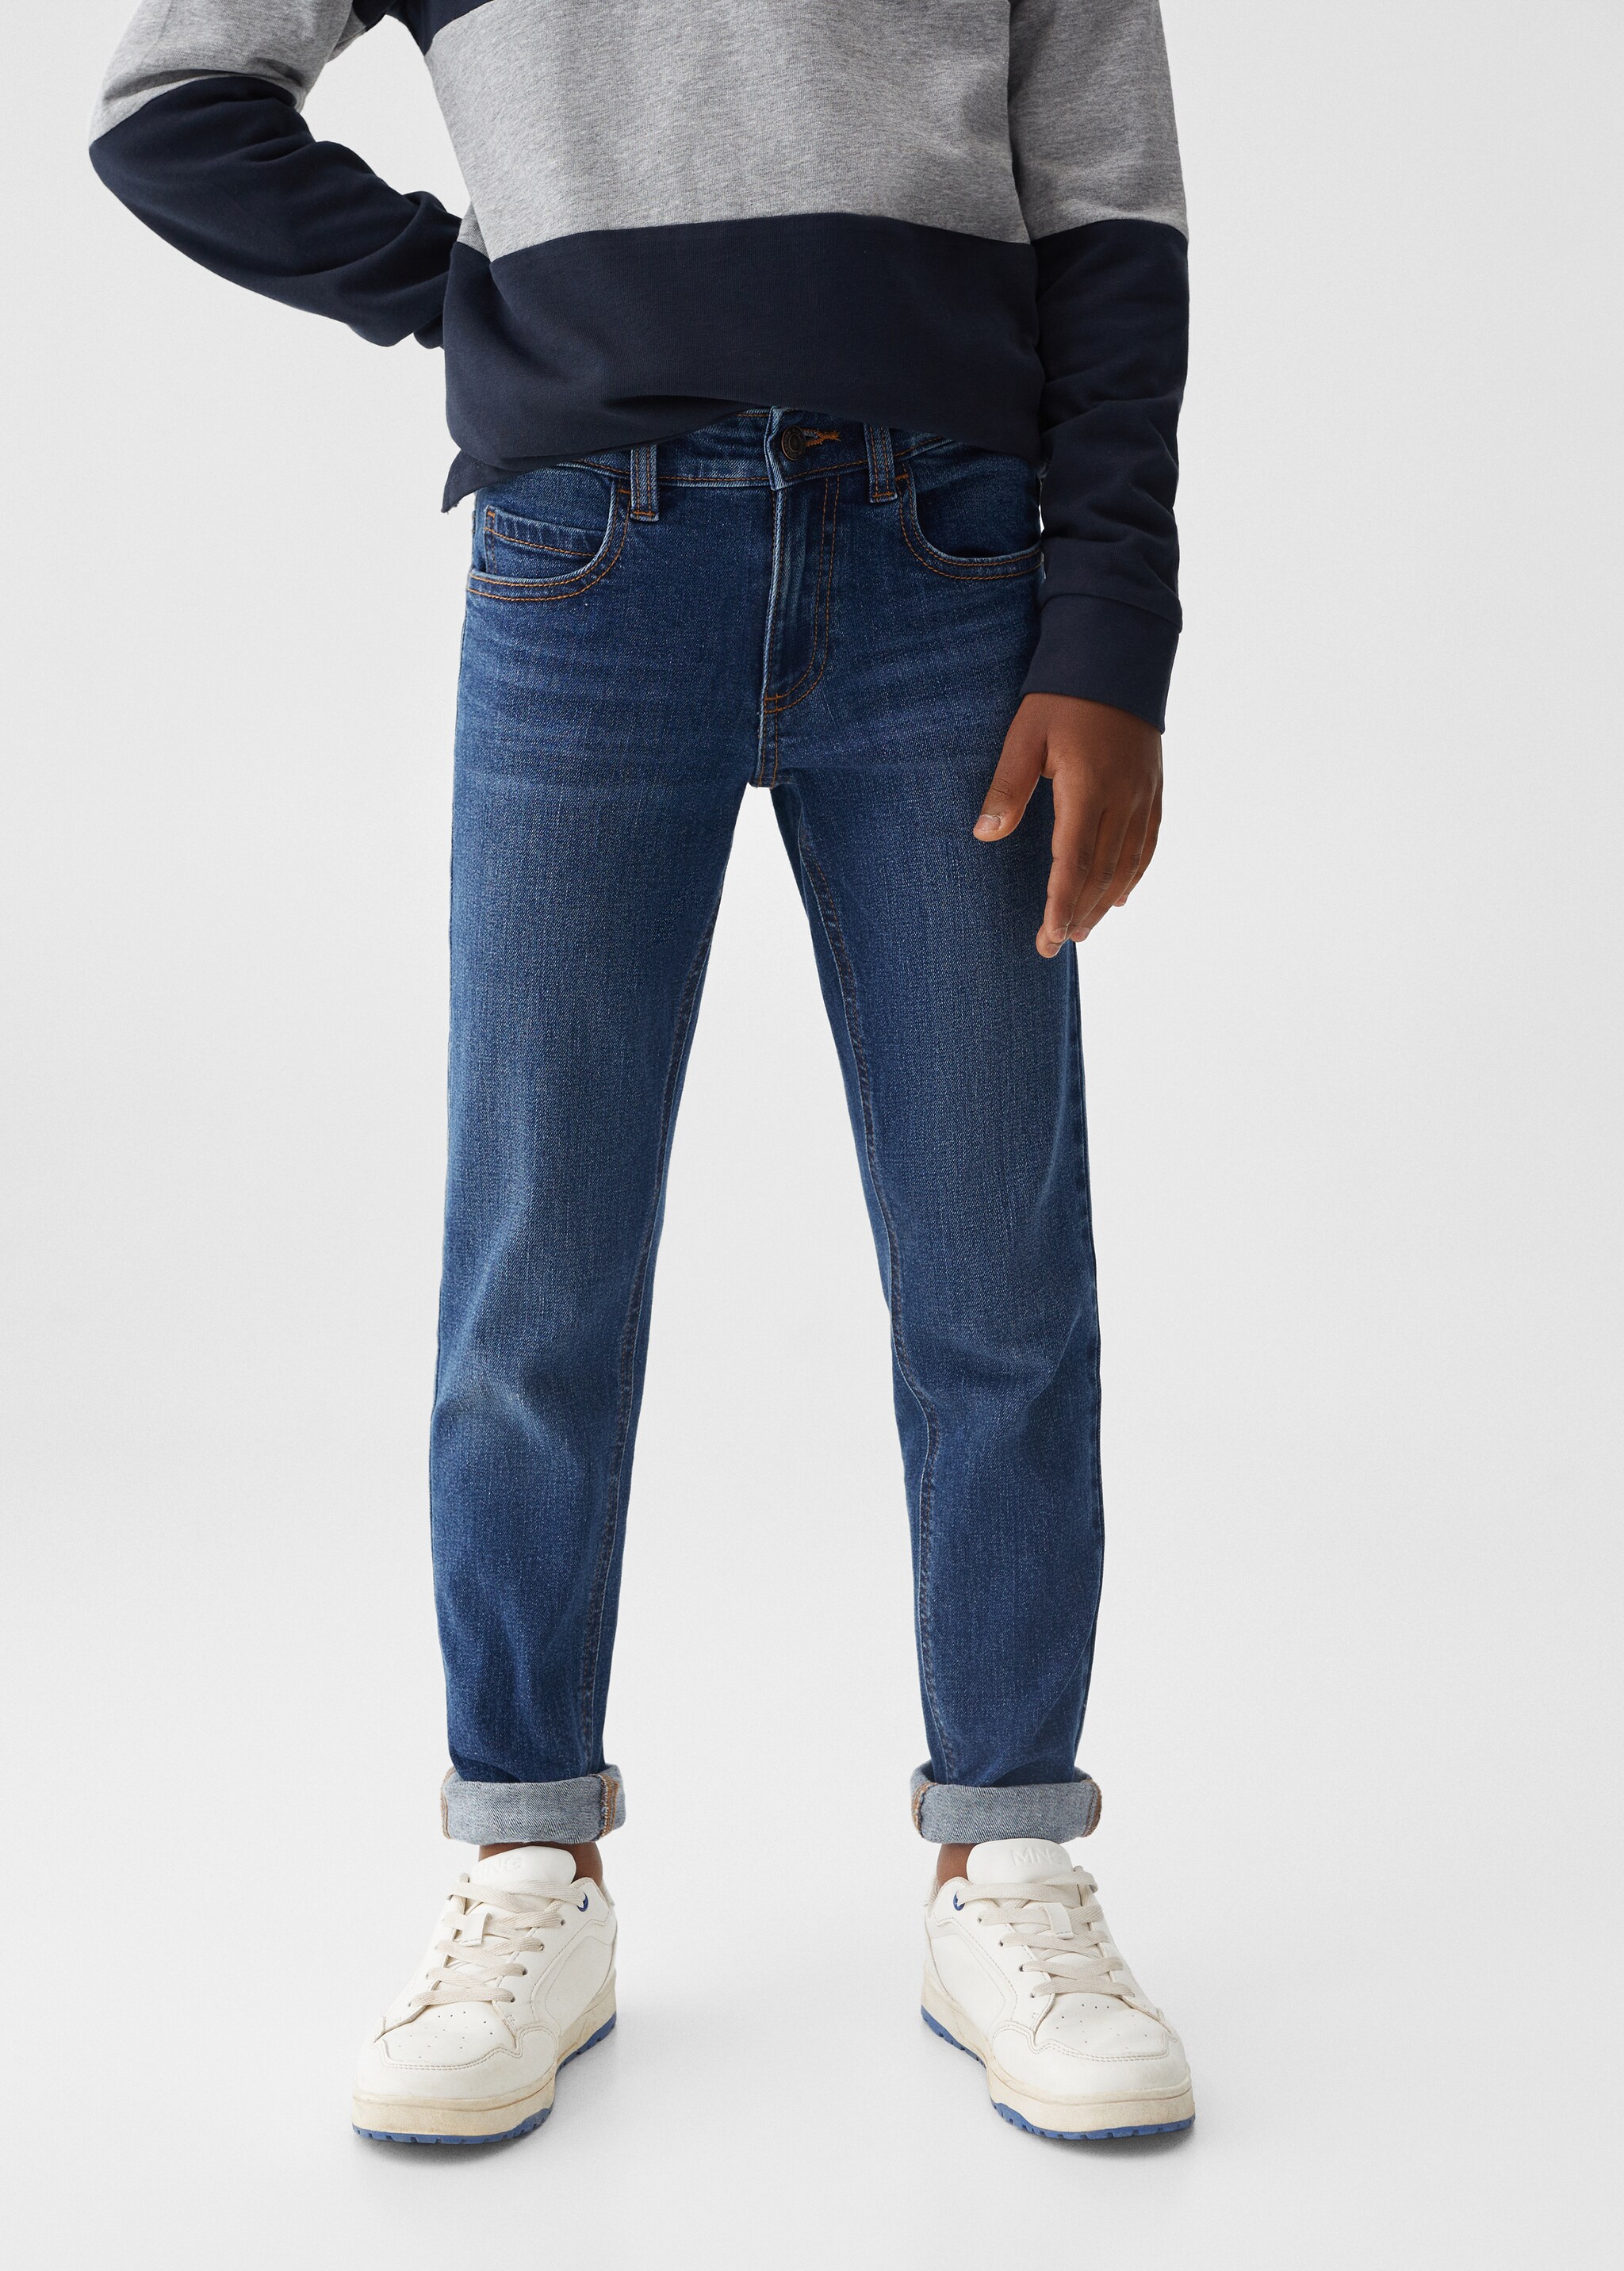 Slim-fit jeans - Details of the article 6